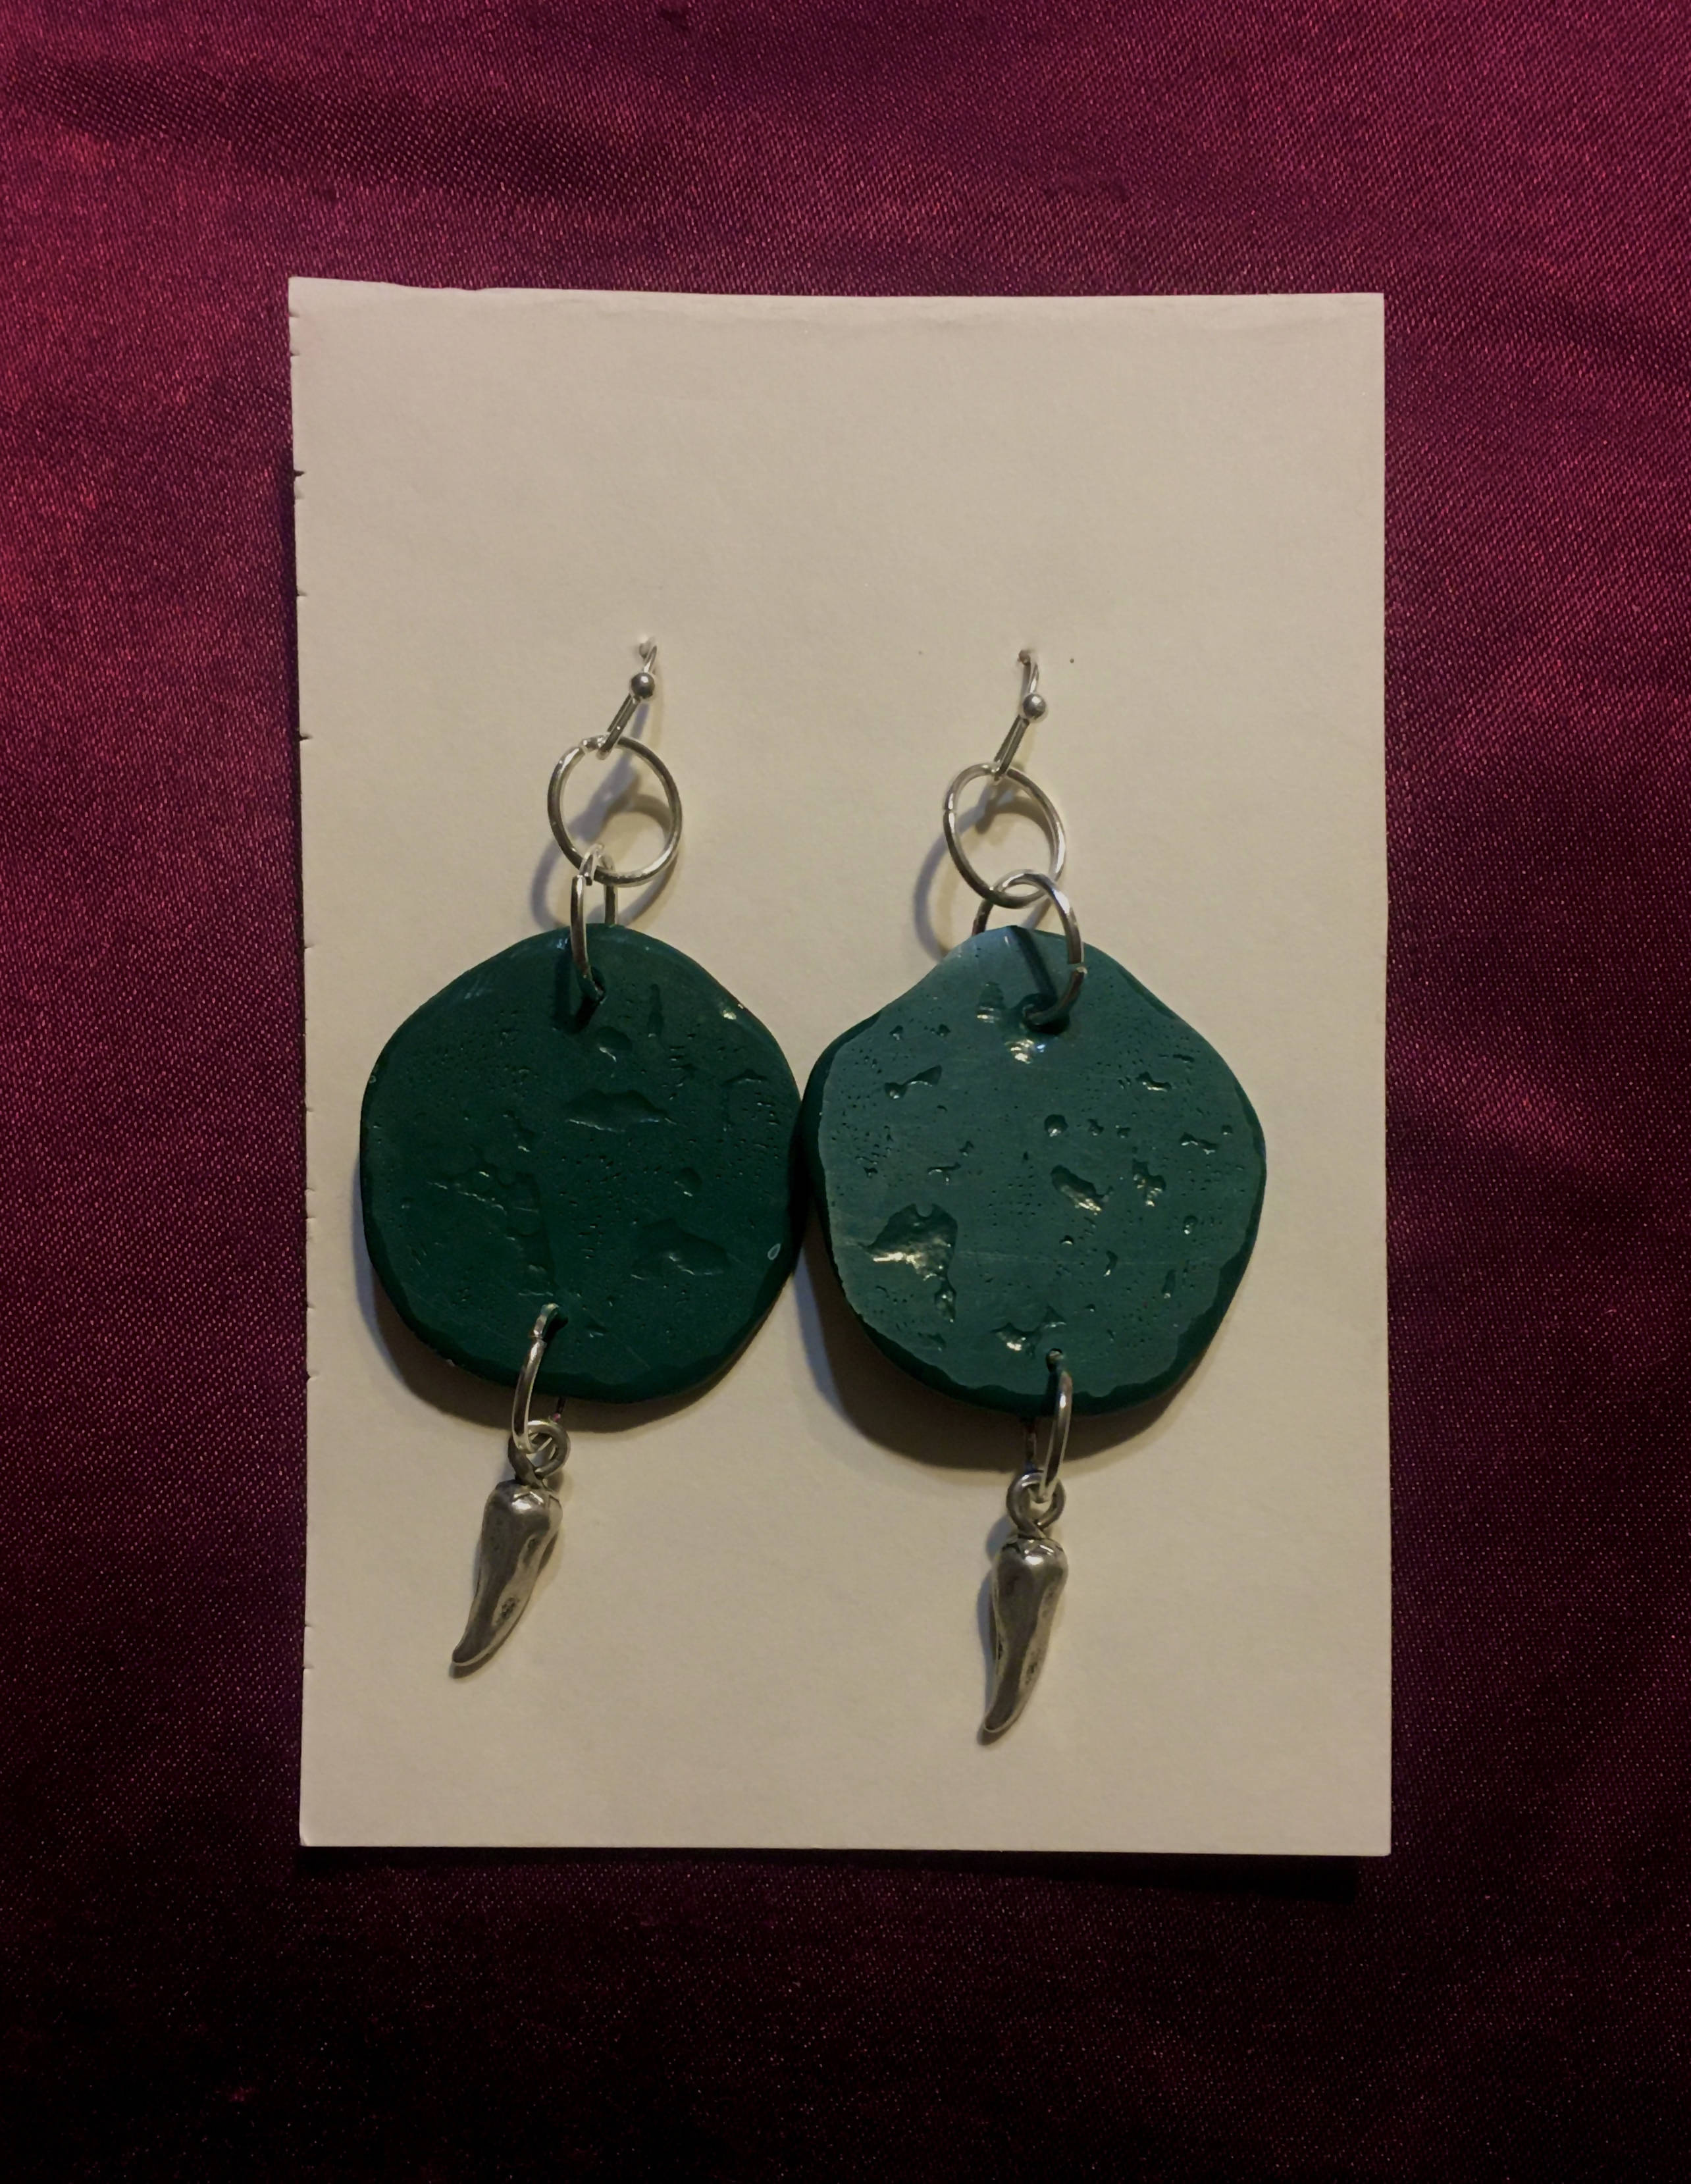 chili lily pad earrings